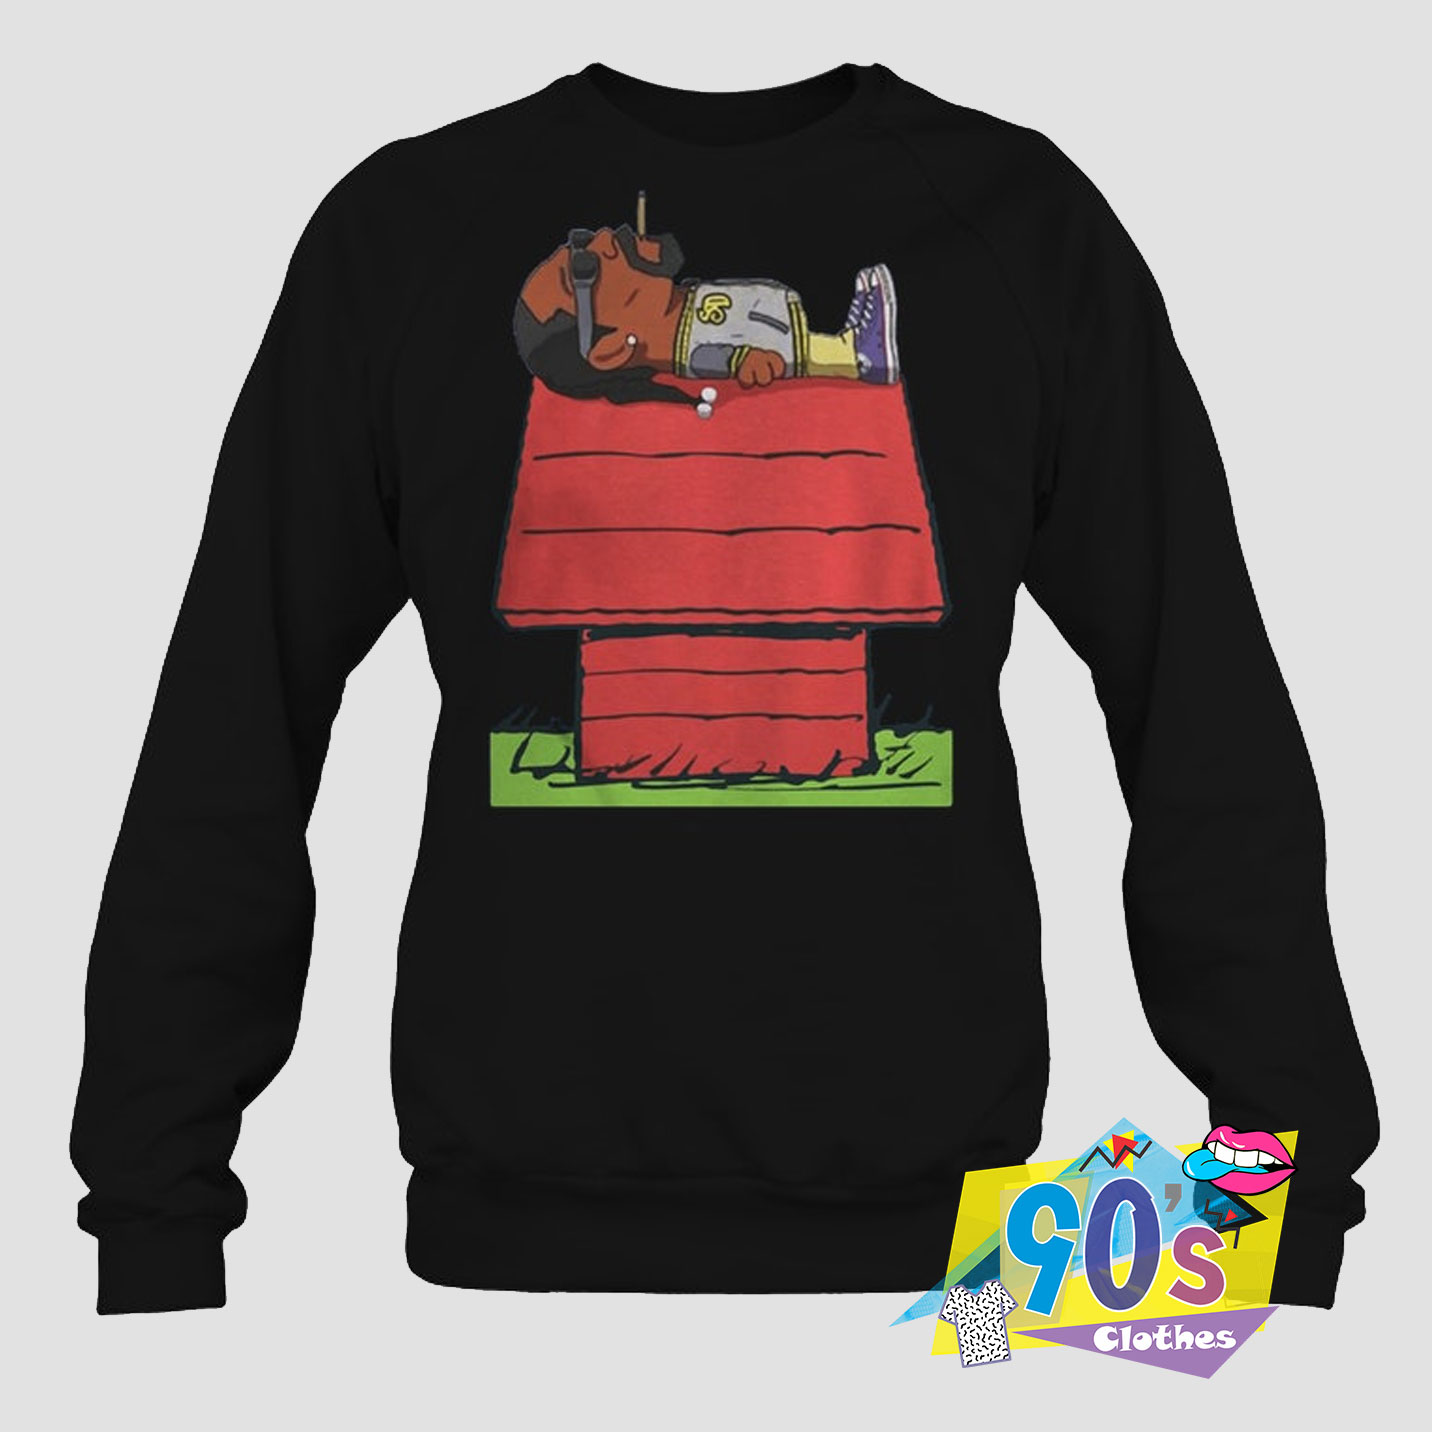 Snoop Dogg On Snoopy S House Sweatshirt On Sale 90sclothes Com